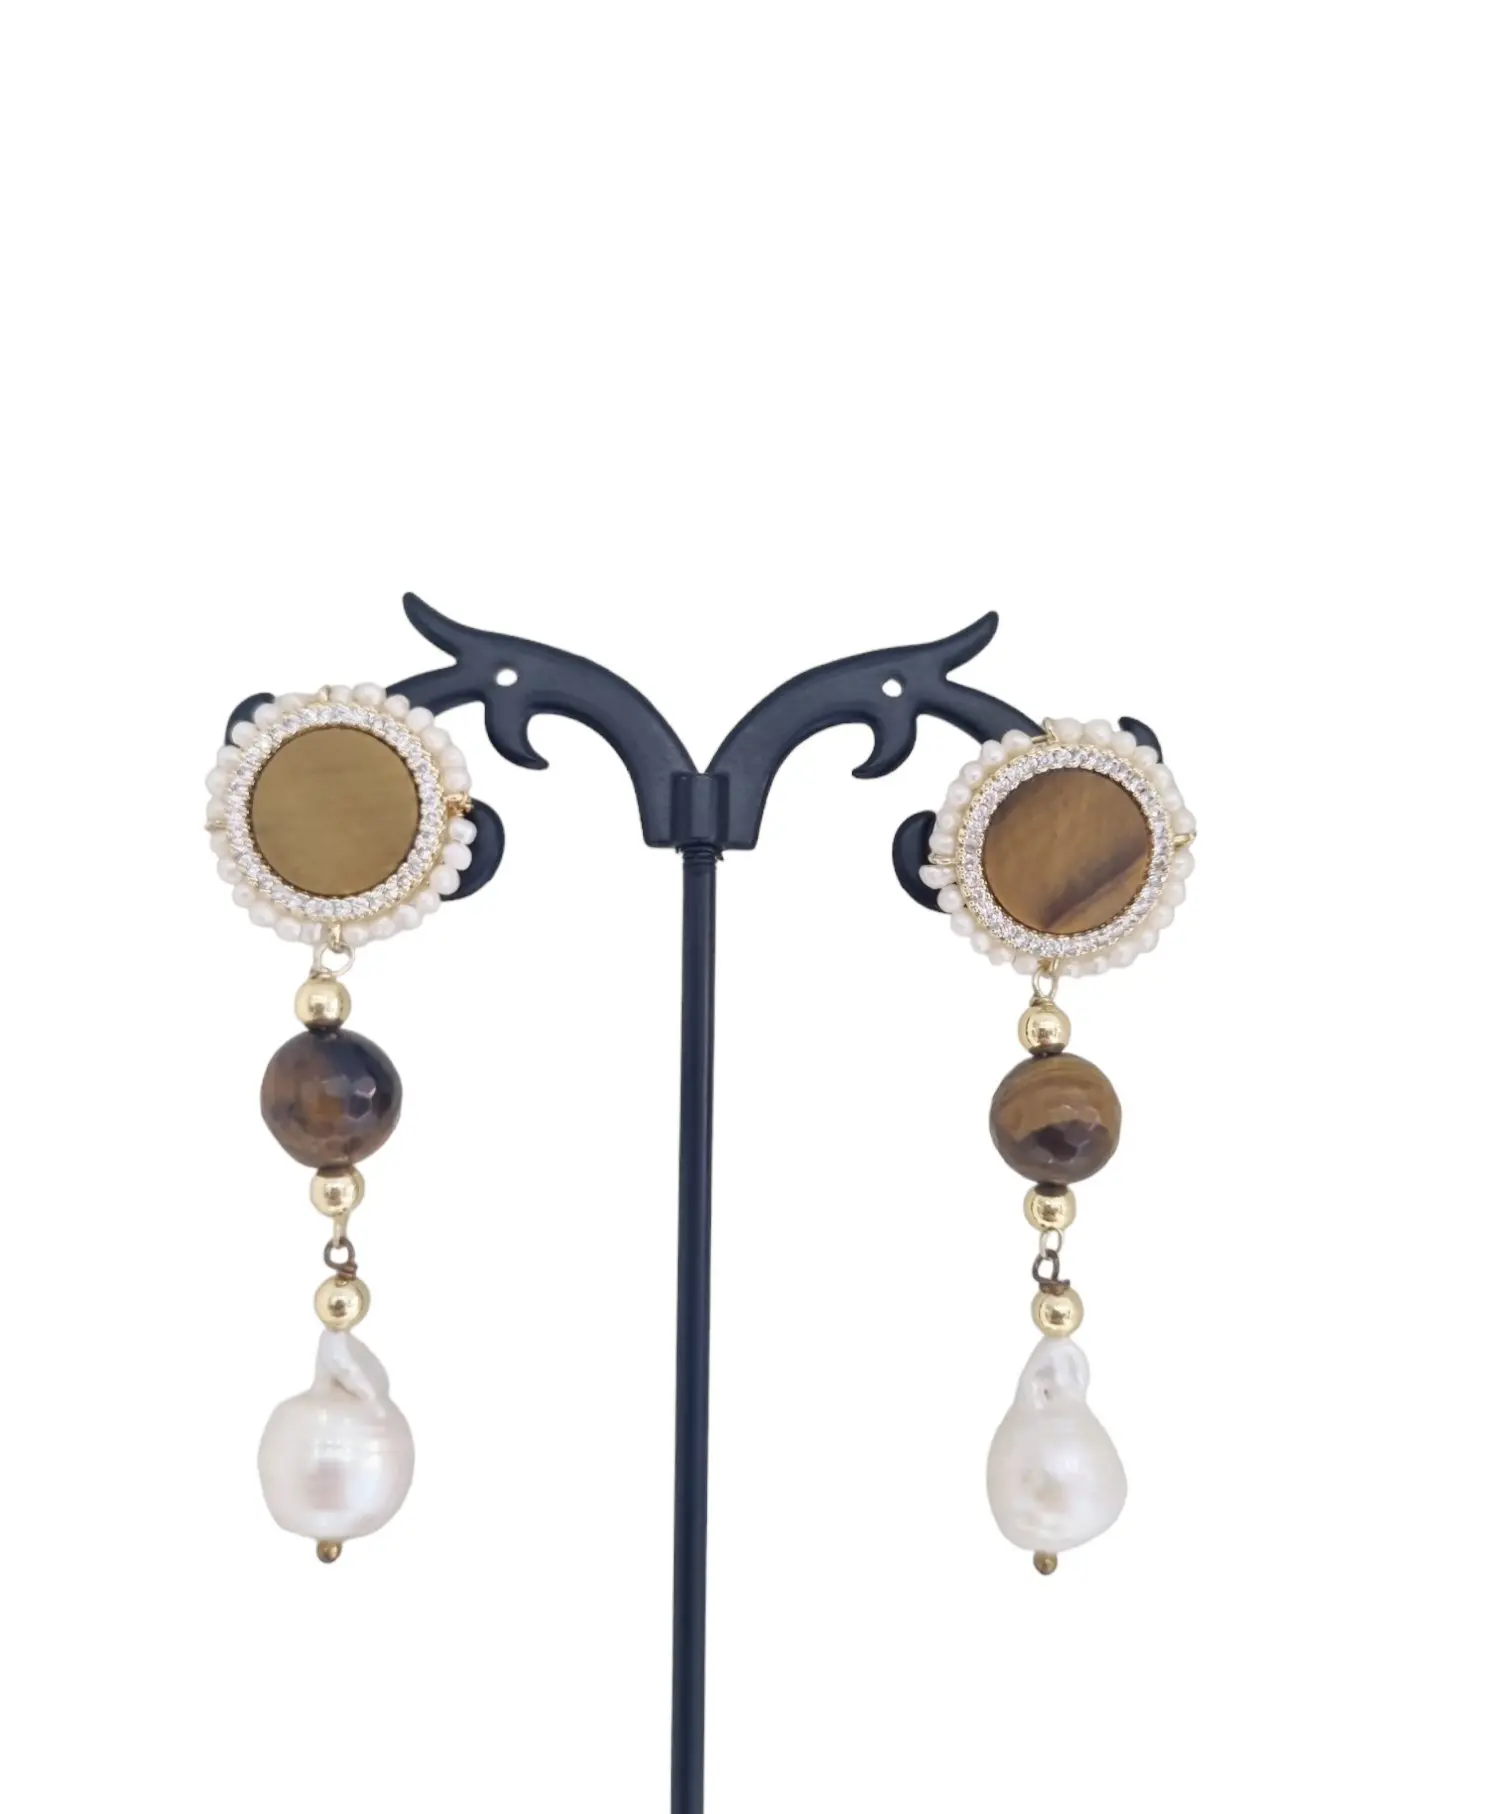 Earrings made with tiger's eye, scaramazza pearl and freshwater pearls. Length 5.5cmWeight 7.3gr